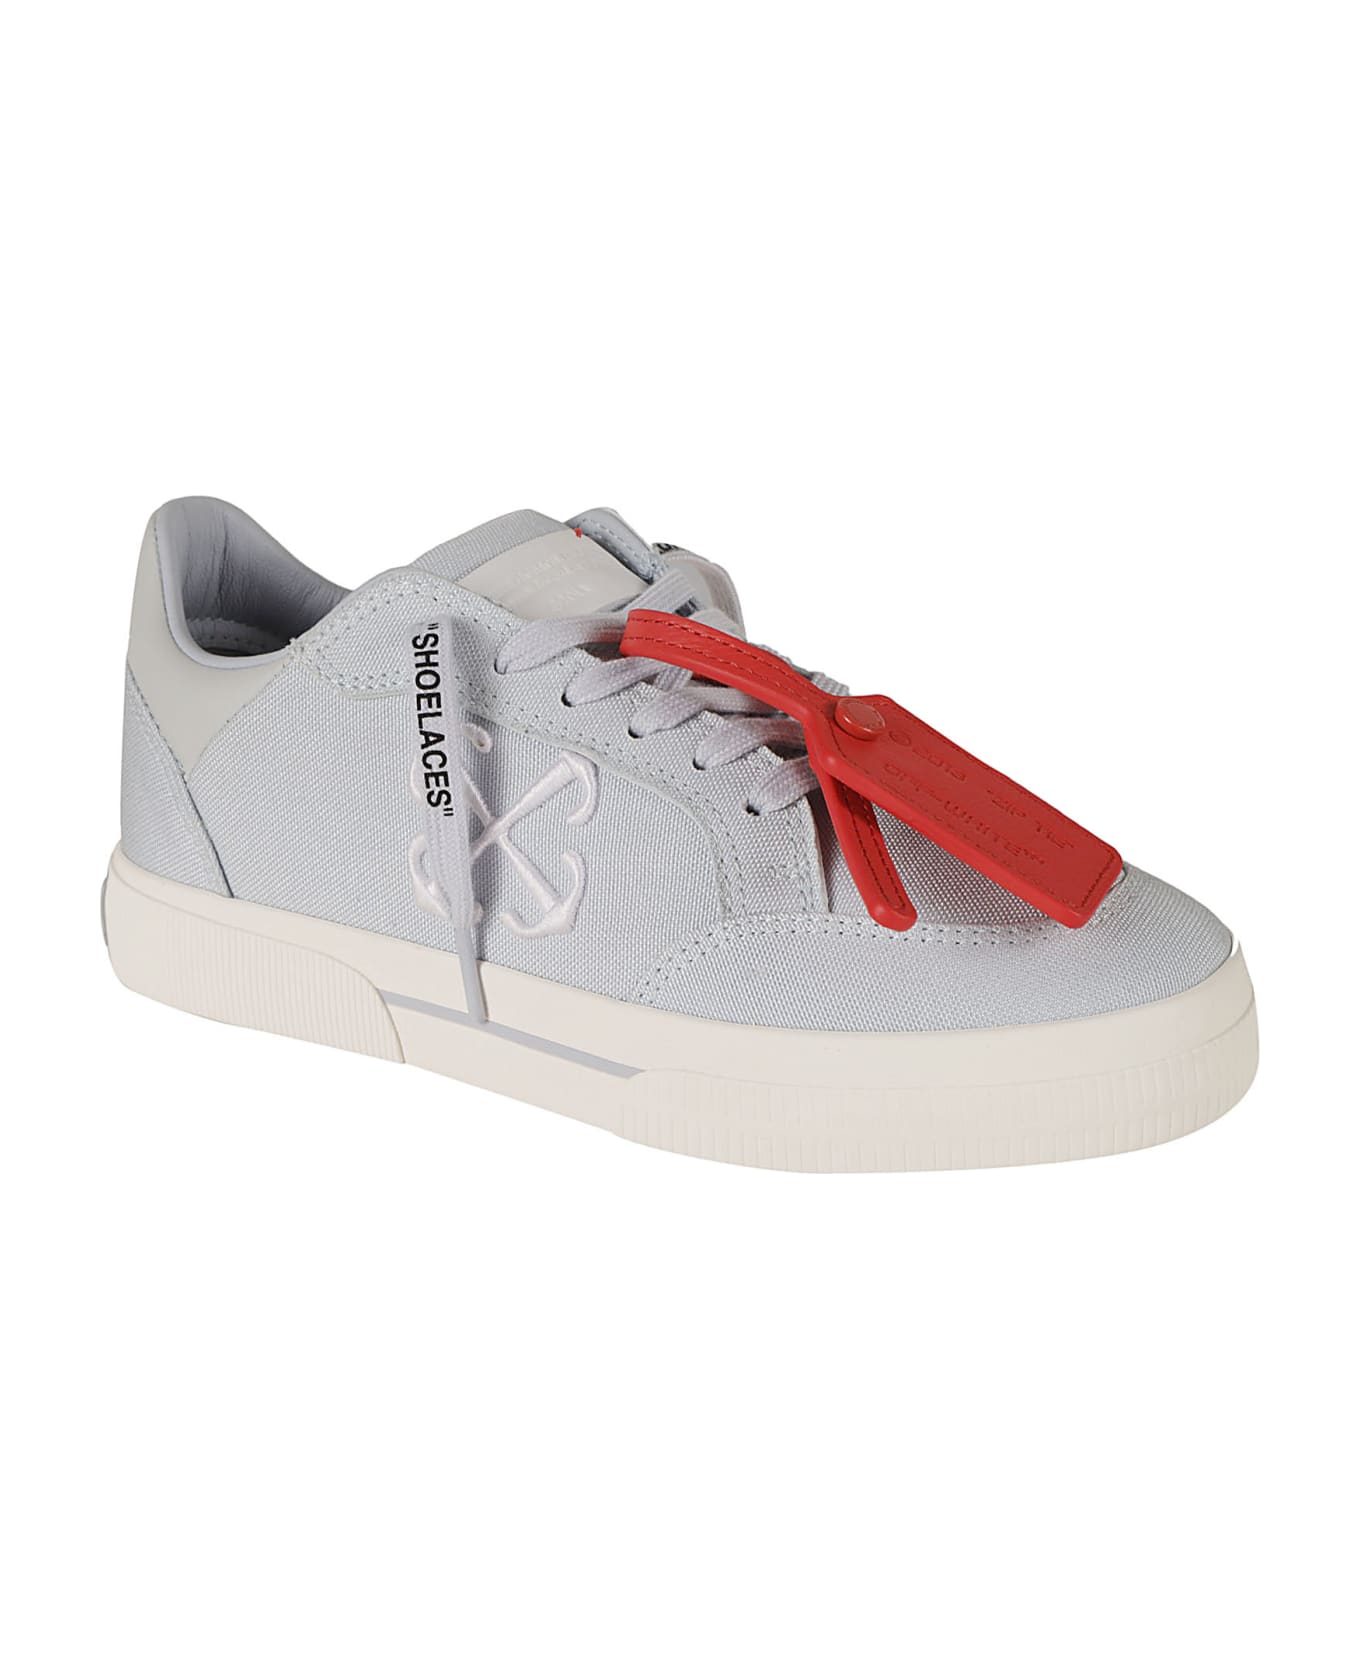 Off-White New Low Vulcanized Canvas Sneakers - Light Blue/White